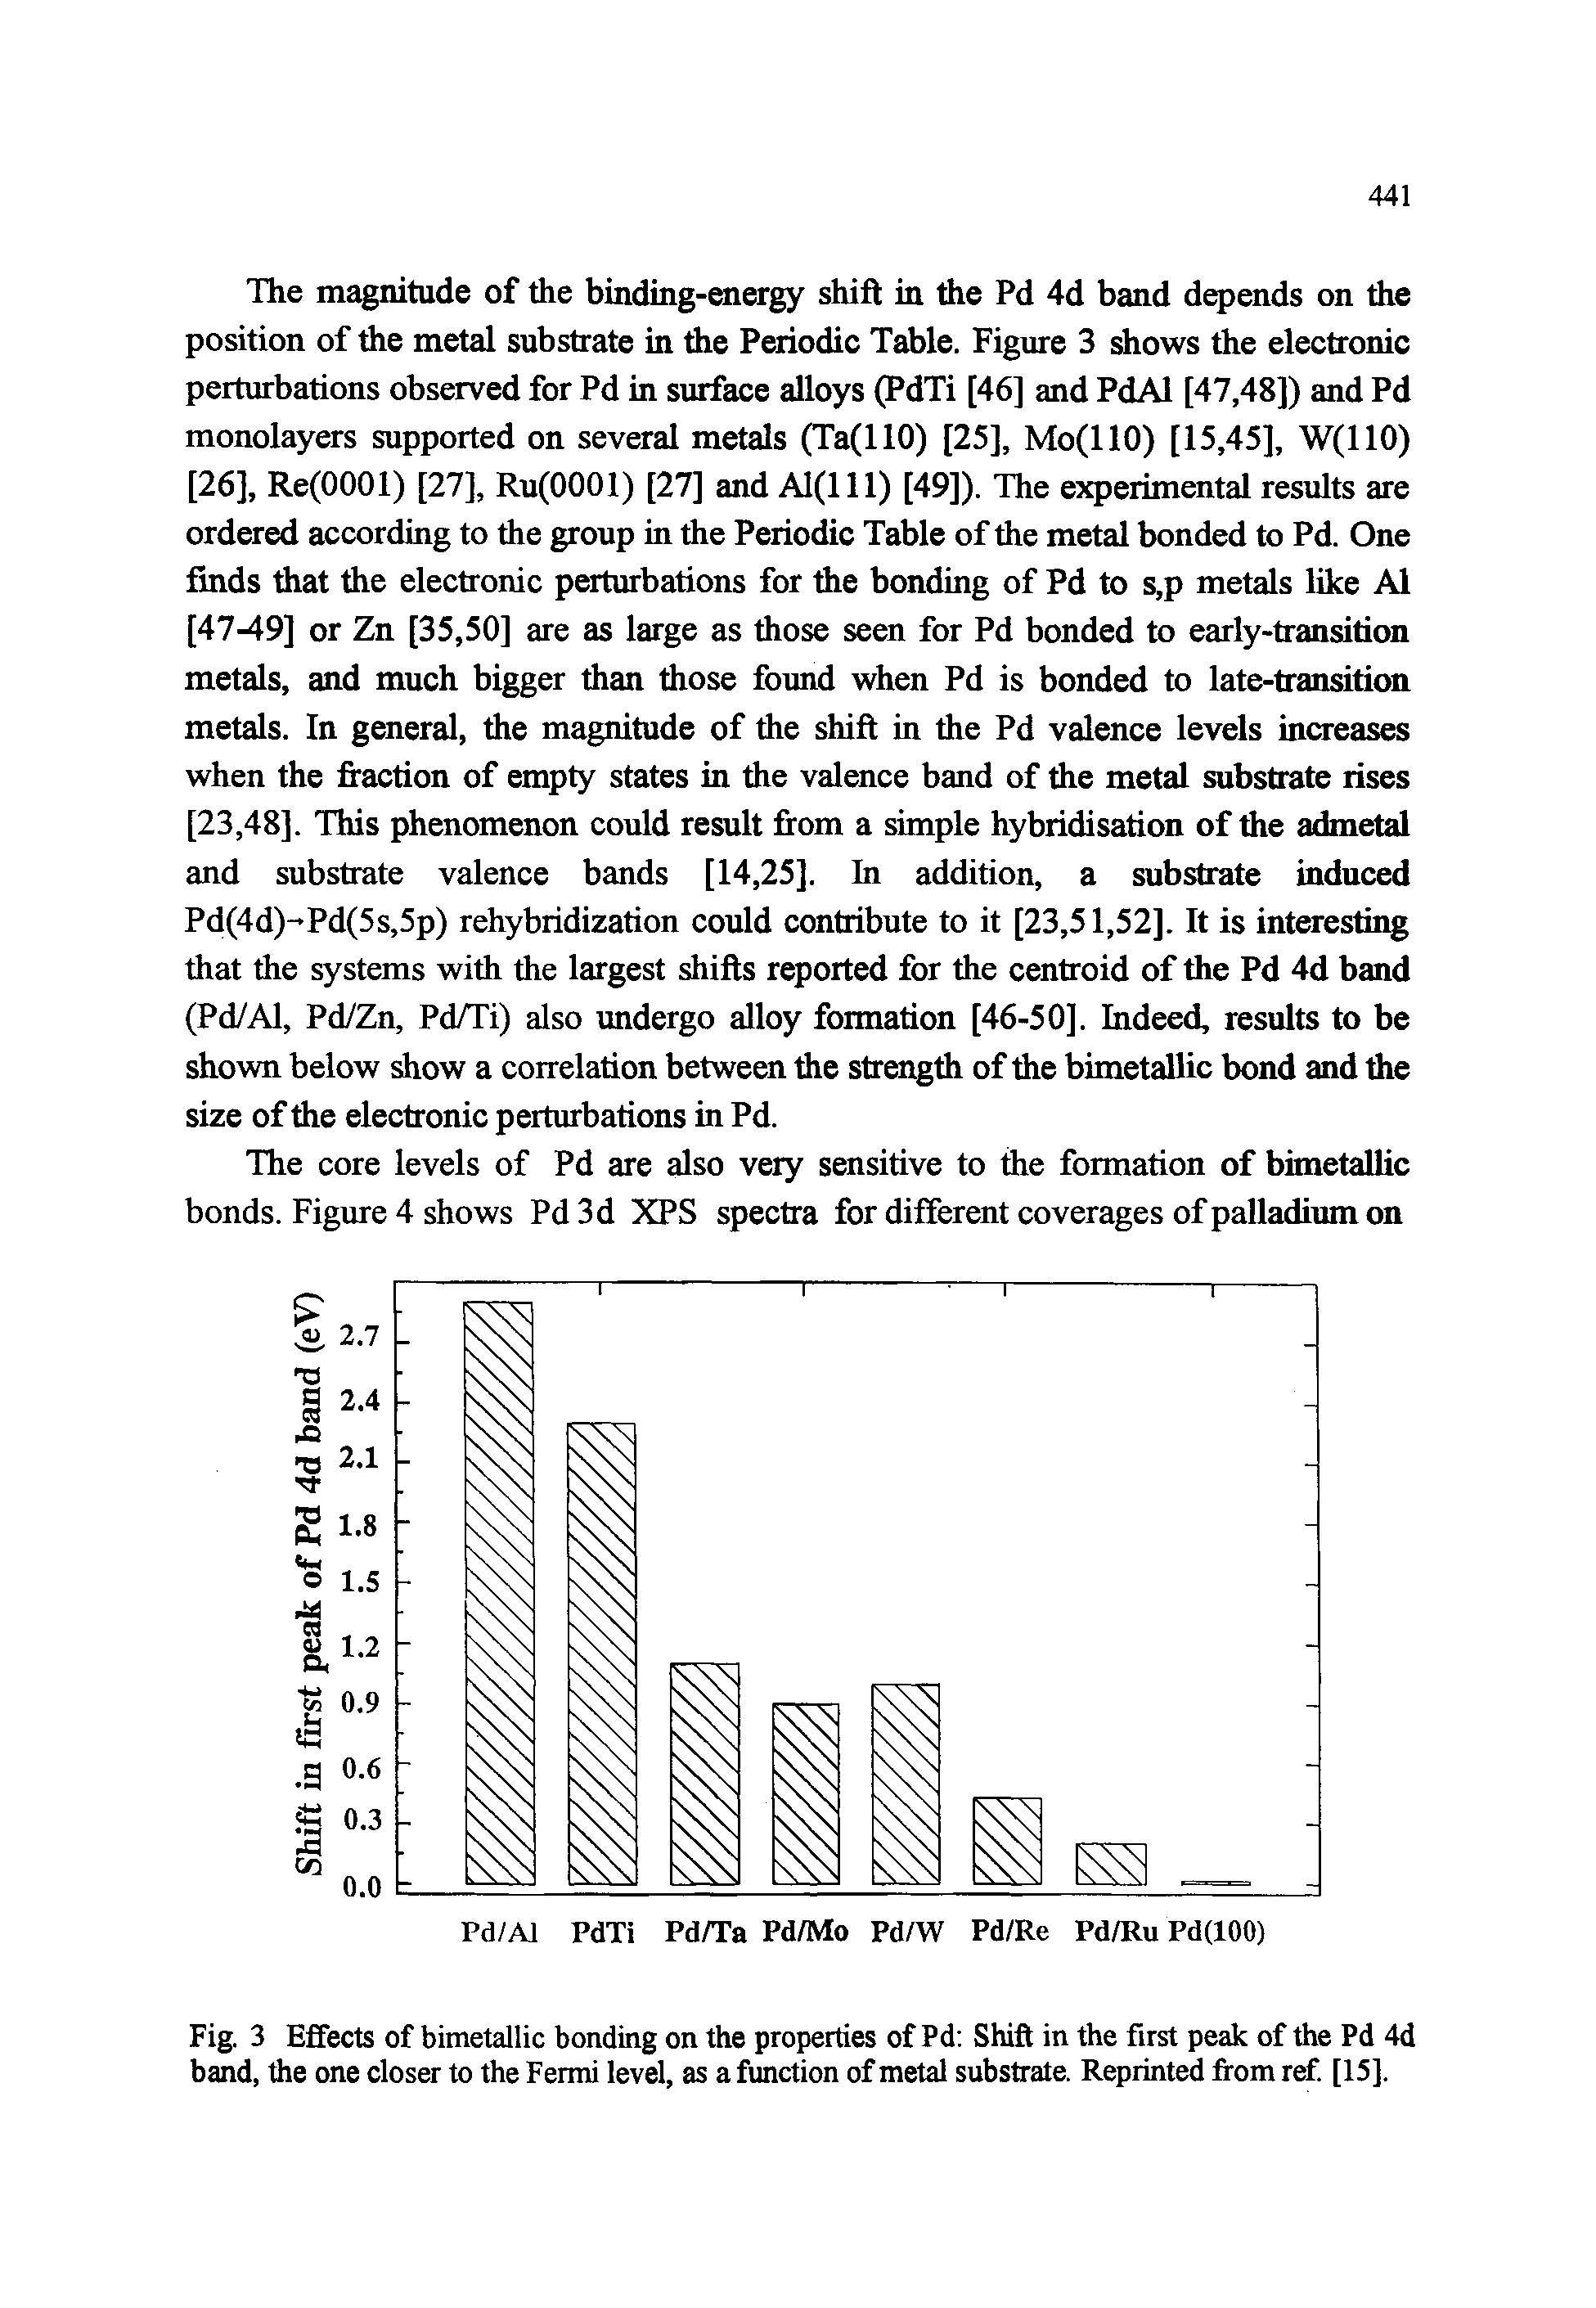 Fig. 3 Effects of bimetallic bonding on the properties of Pd Shift in the first peak of the Pd 4d band, the one closer to the Fermi level, as a function of metal substrate. Reprinted from ref [15].